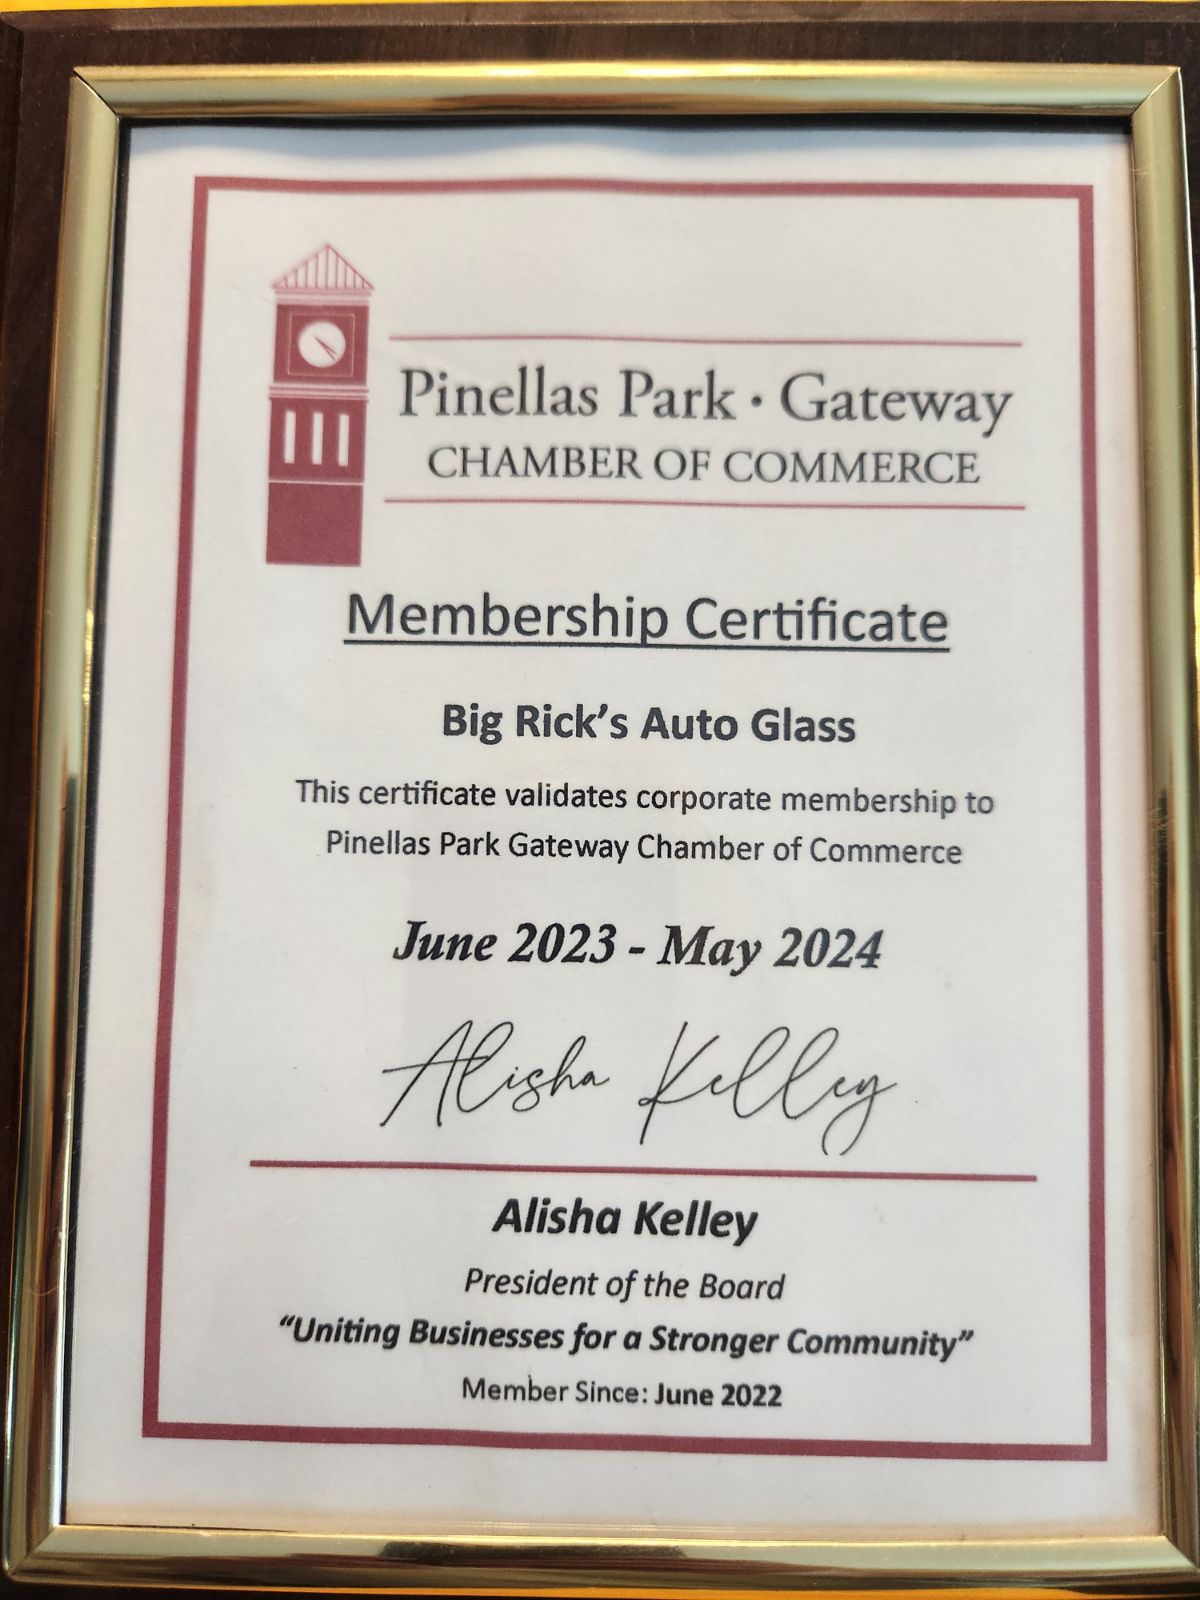 About our Accrediations - Pinellas Park - Gateway Chamber of Commerce - Big Rick's Auto Glass